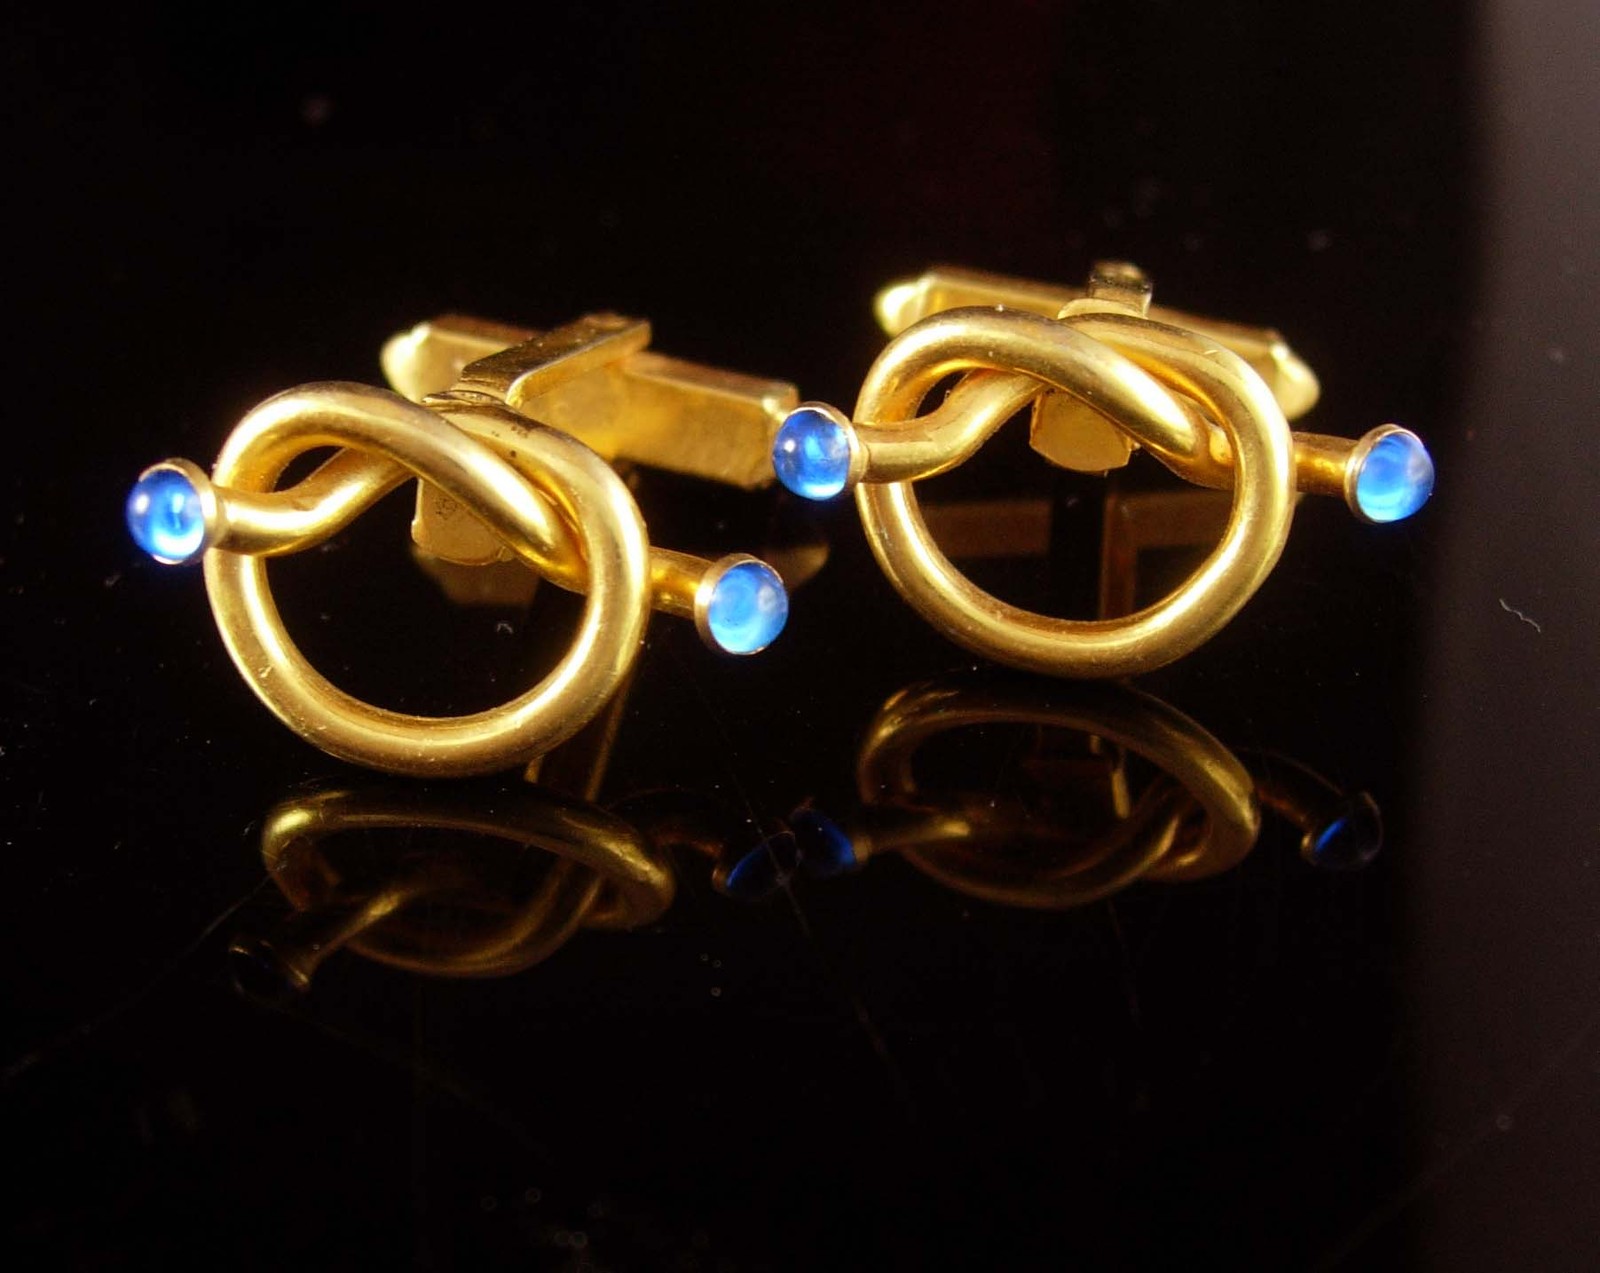 Vintage LOVE KNOT Cufflinks Anson blue Jewel ends 18th 65th anniversary gift twi - $95.00